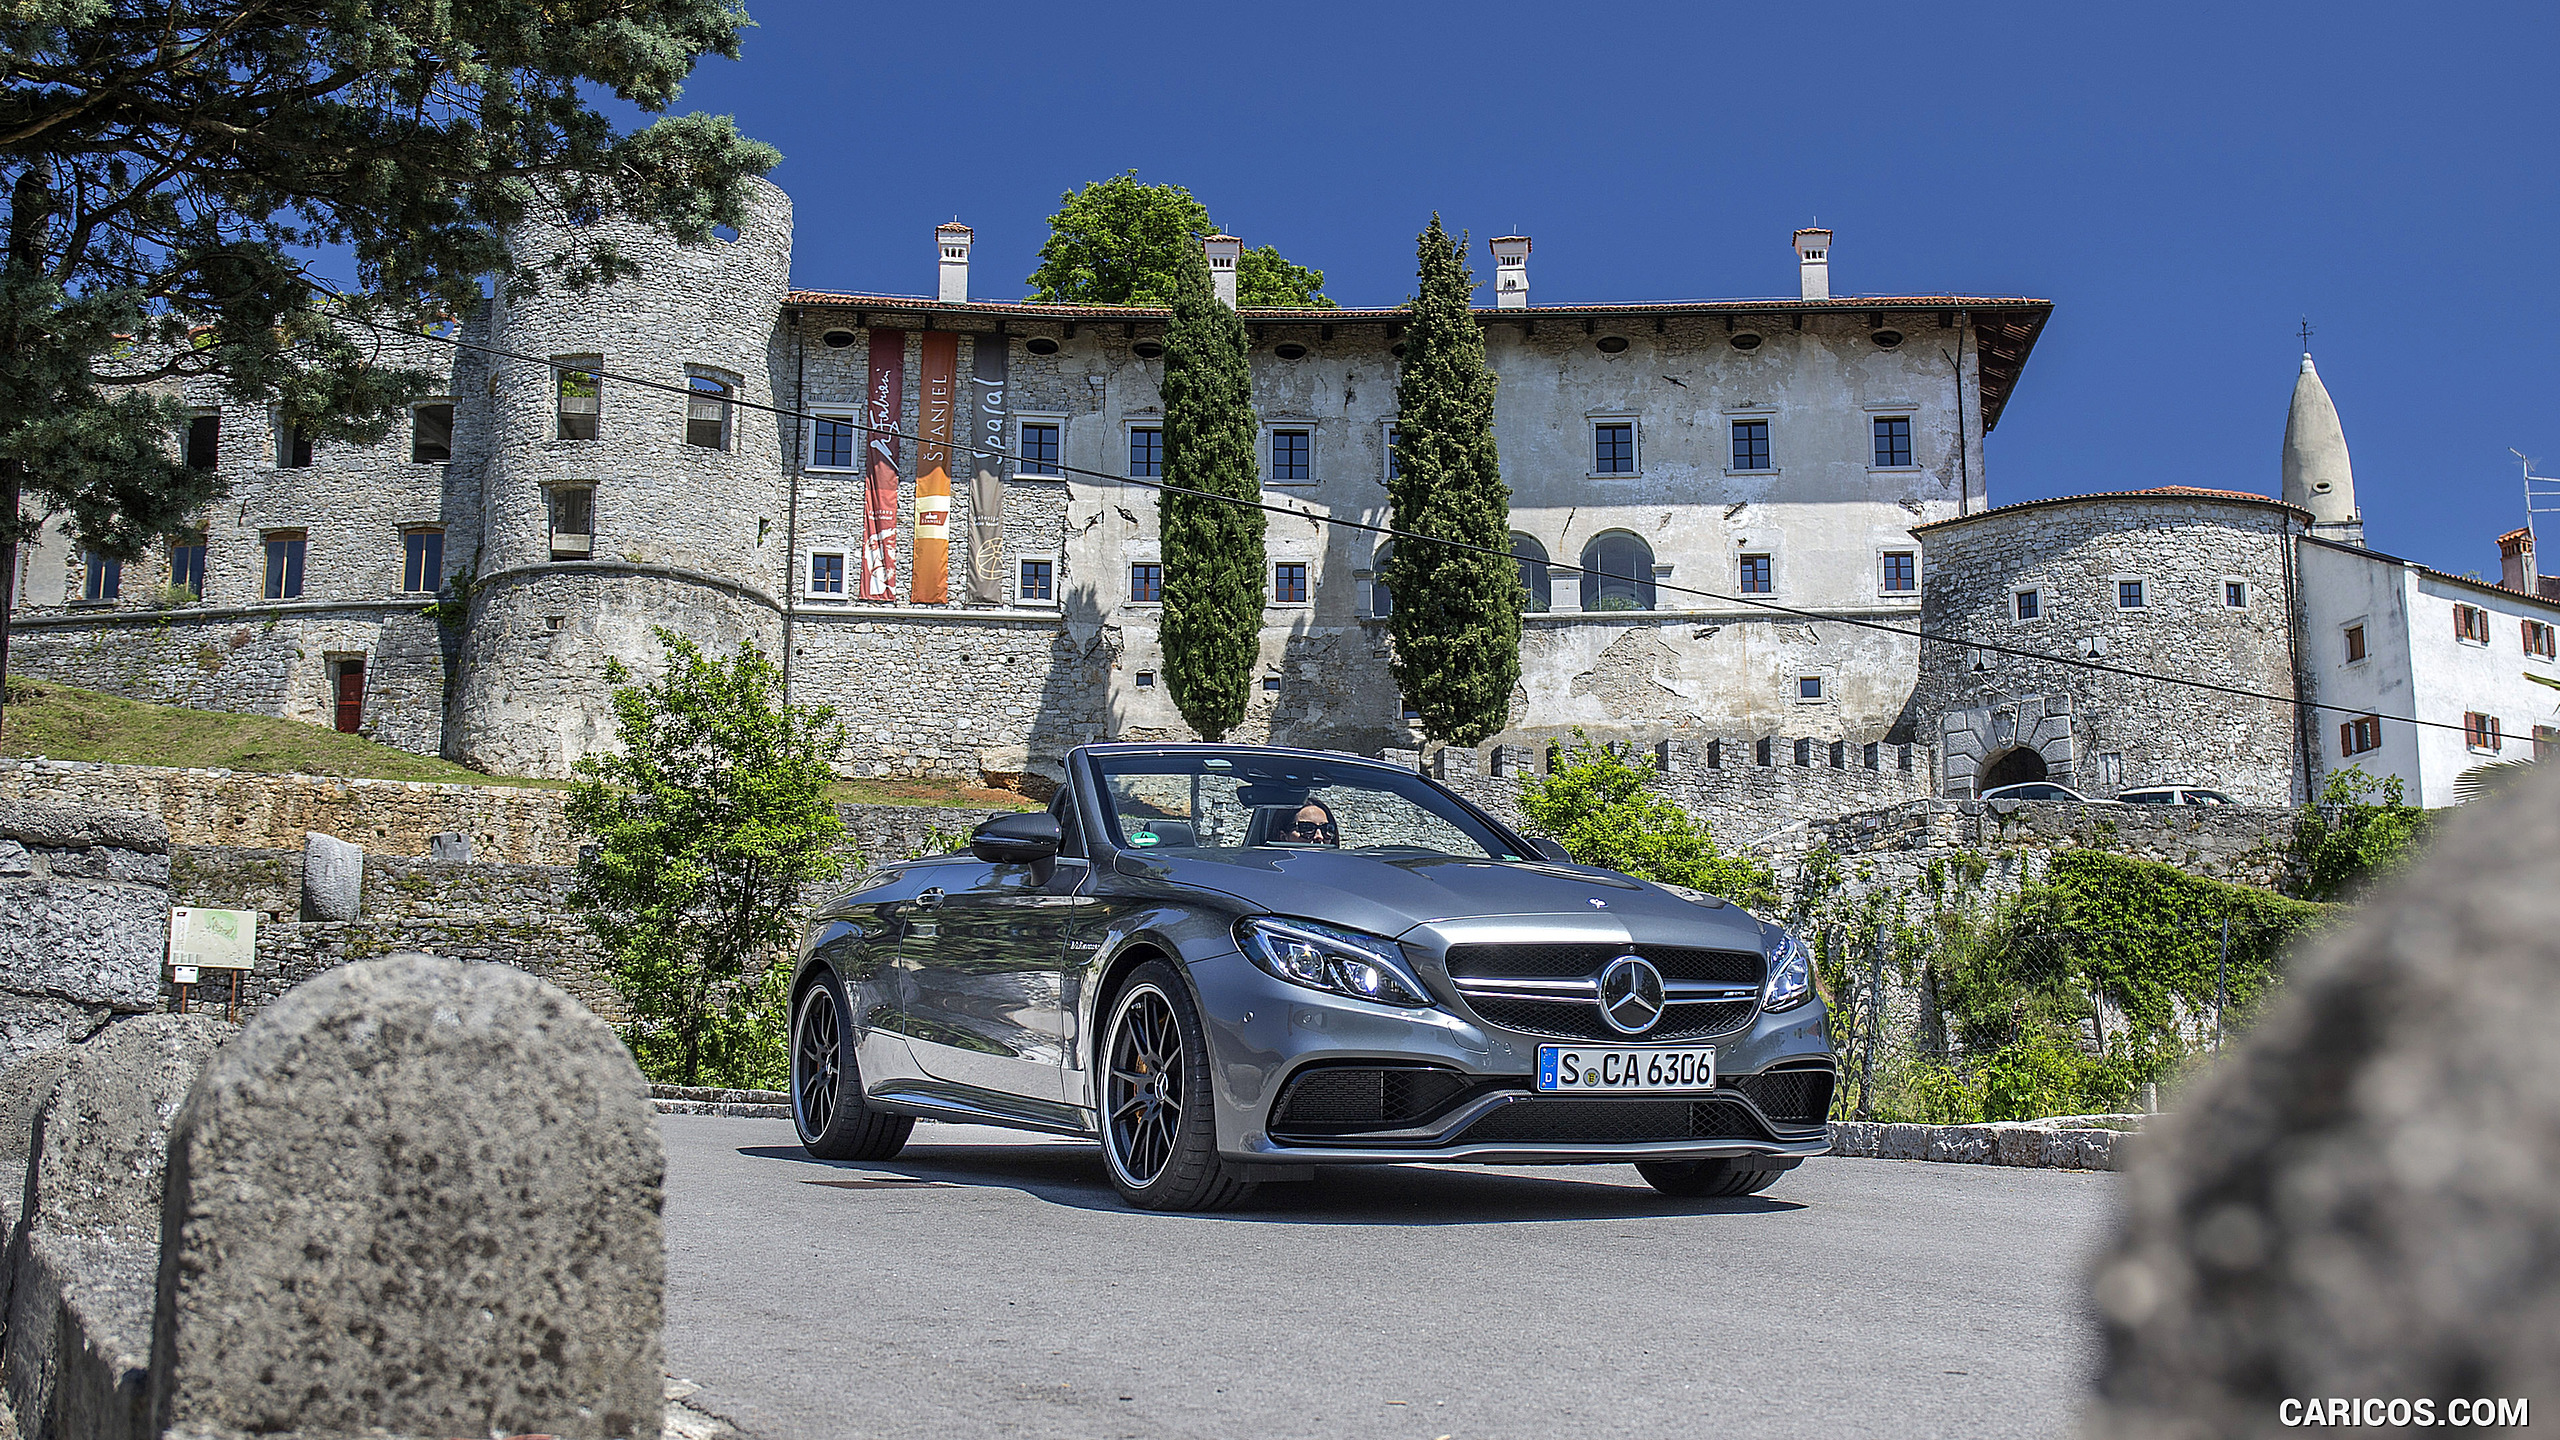 2017 Mercedes-AMG C63 S Cabriolet - Front, #45 of 222